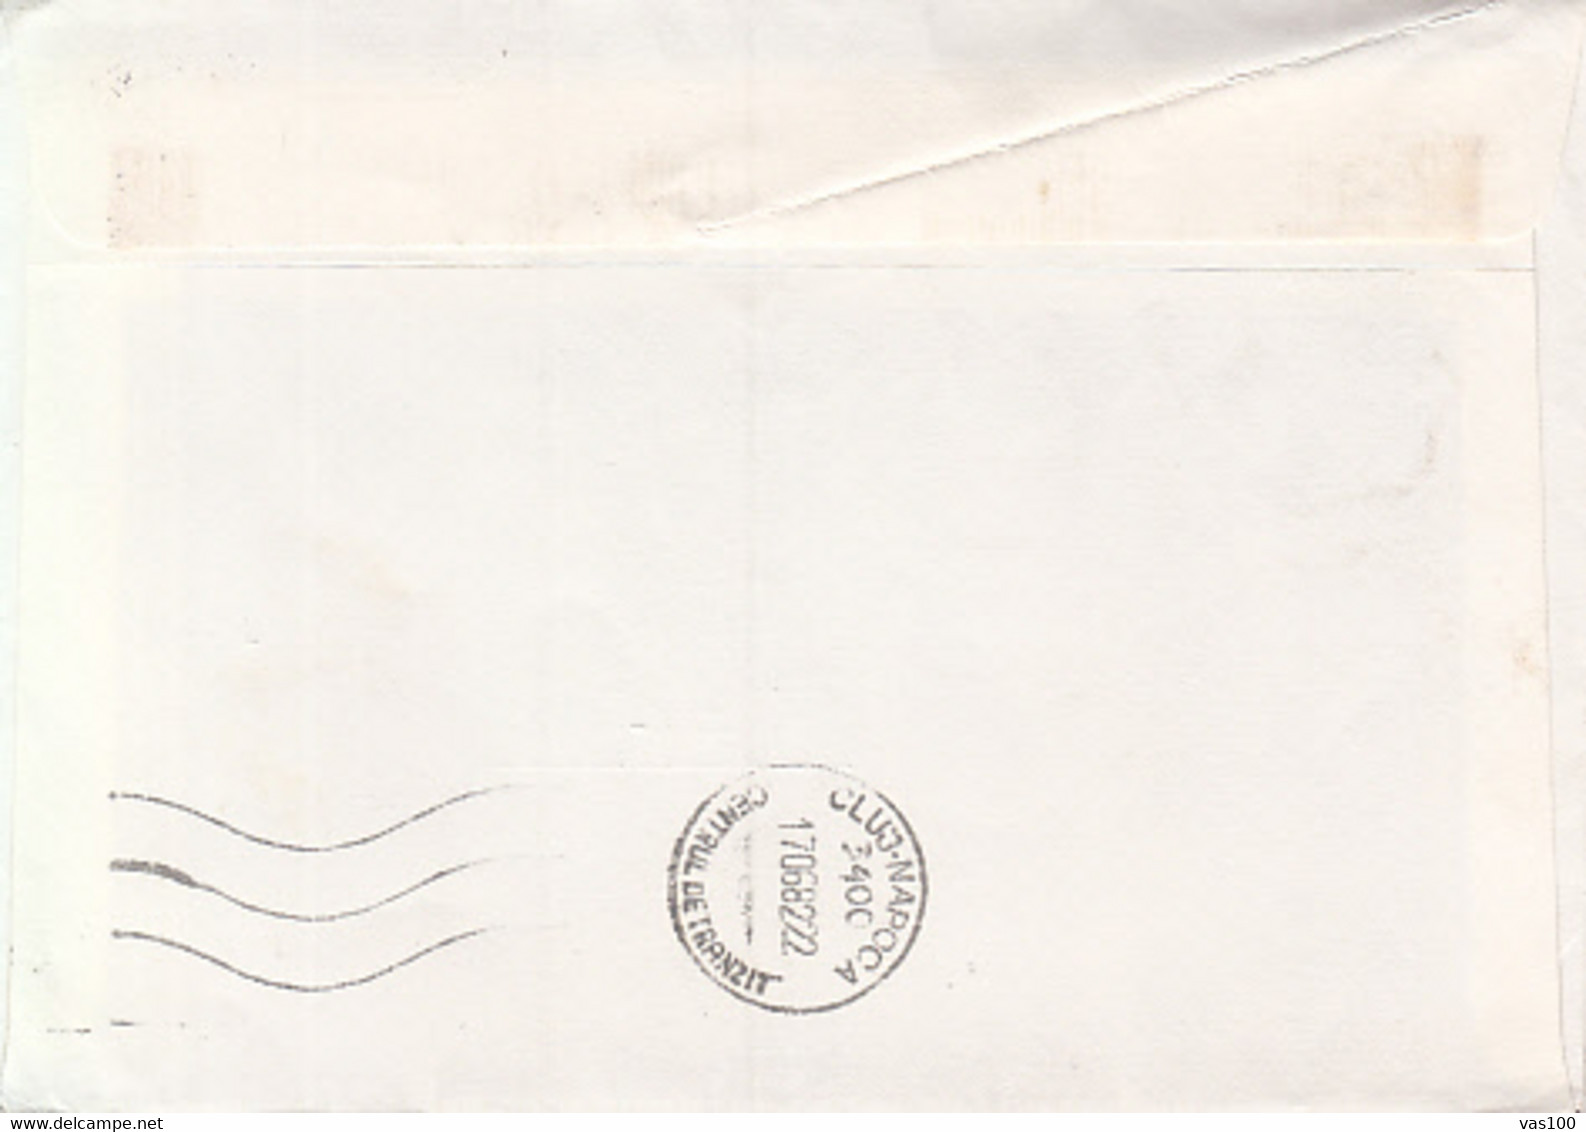 GRAND DUKE JEAN, SYNAGOGUE, STAMPS ON COVER, 1982, LUXEMBOURG - Storia Postale